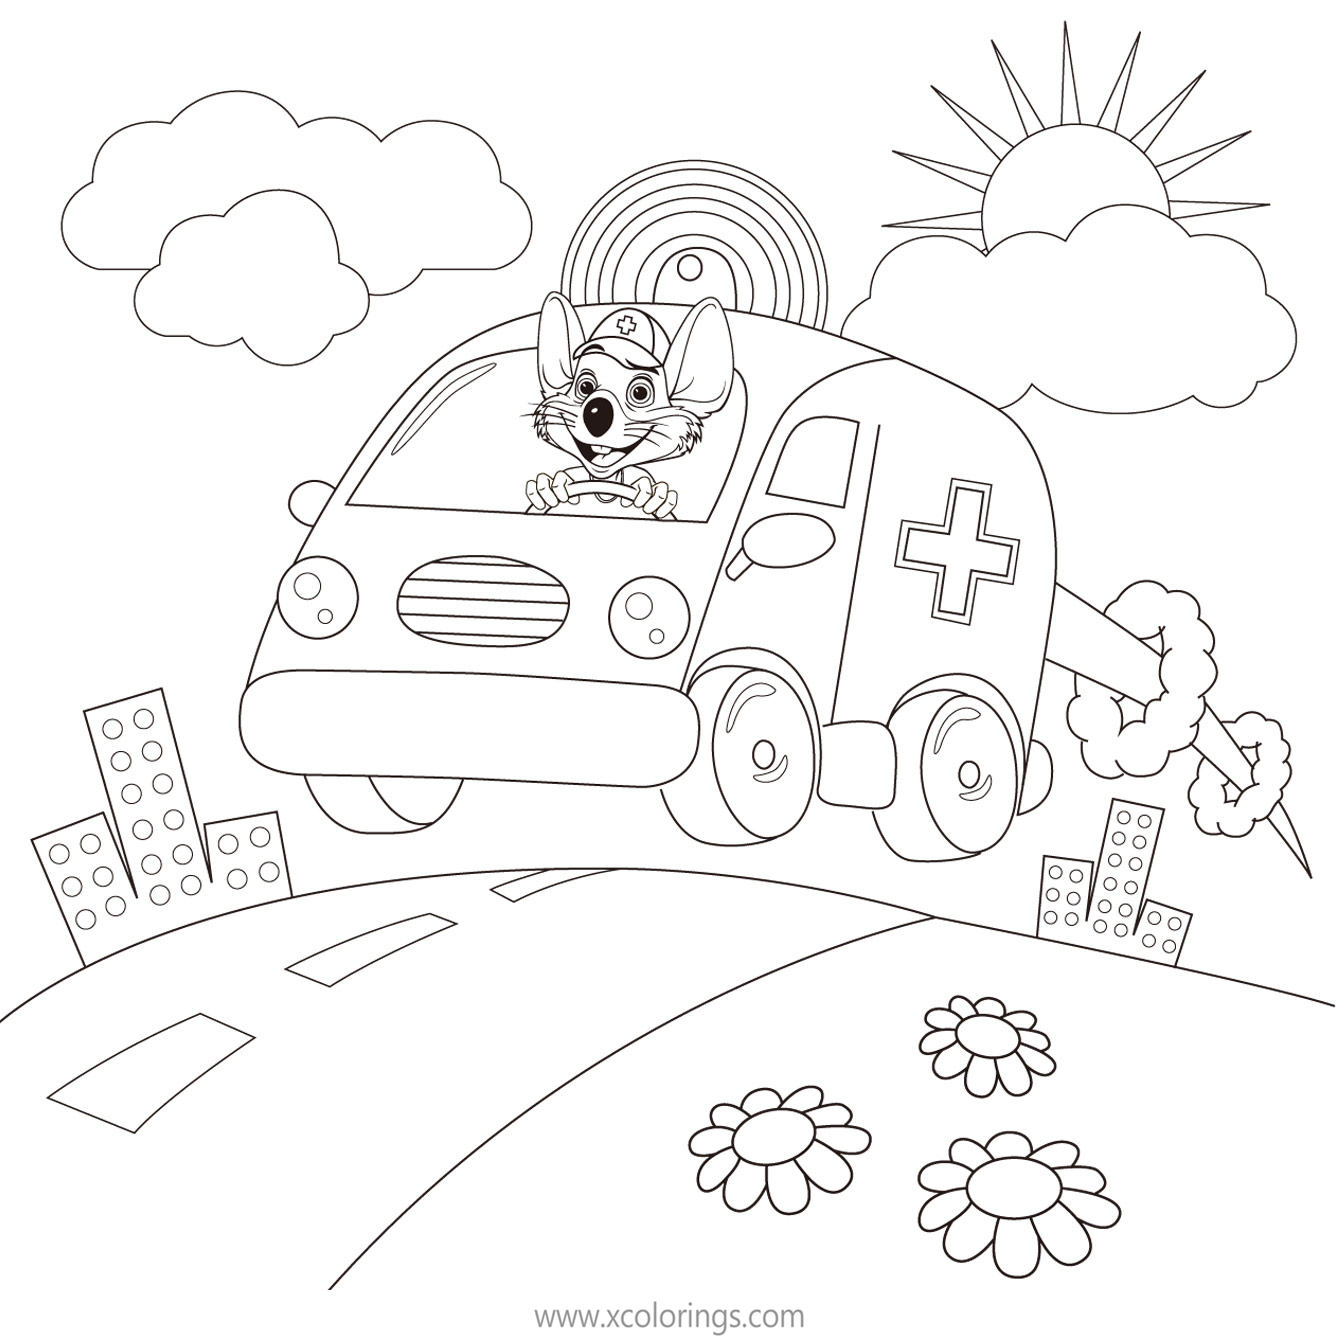 Free Chuck E Cheese Coloring Pages Ambulance printable